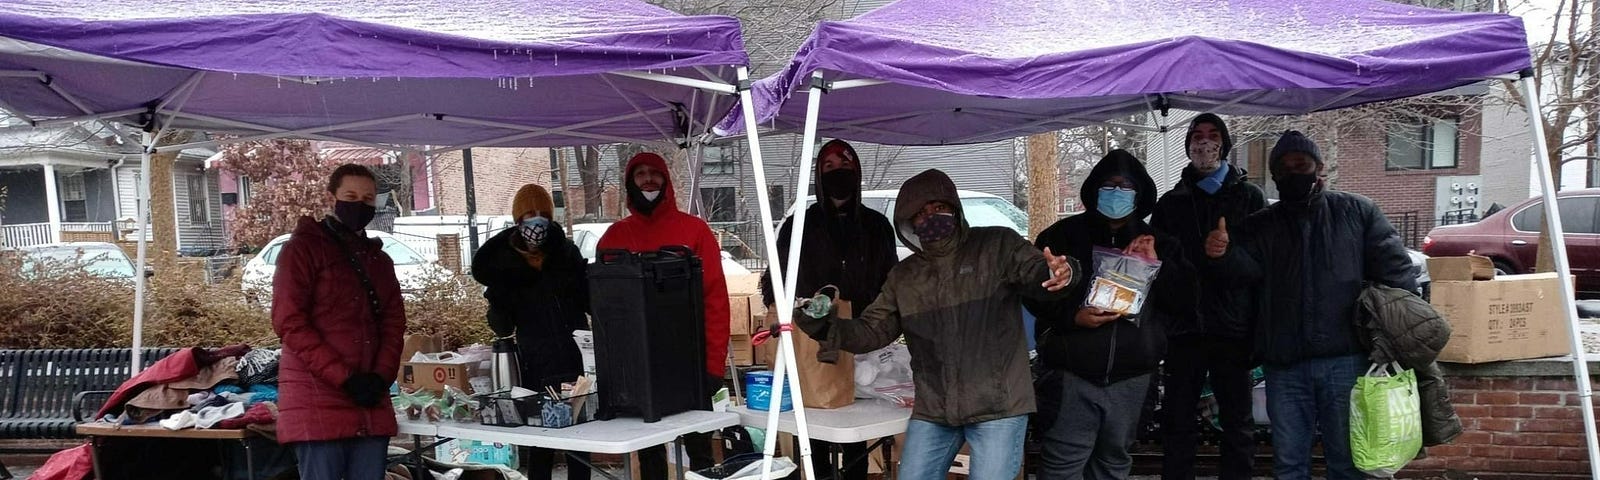 Ward 4 Mutual Aid Unhoused Advocacy members standing under tents at original Georgia Avenue Washington DC location on icy day